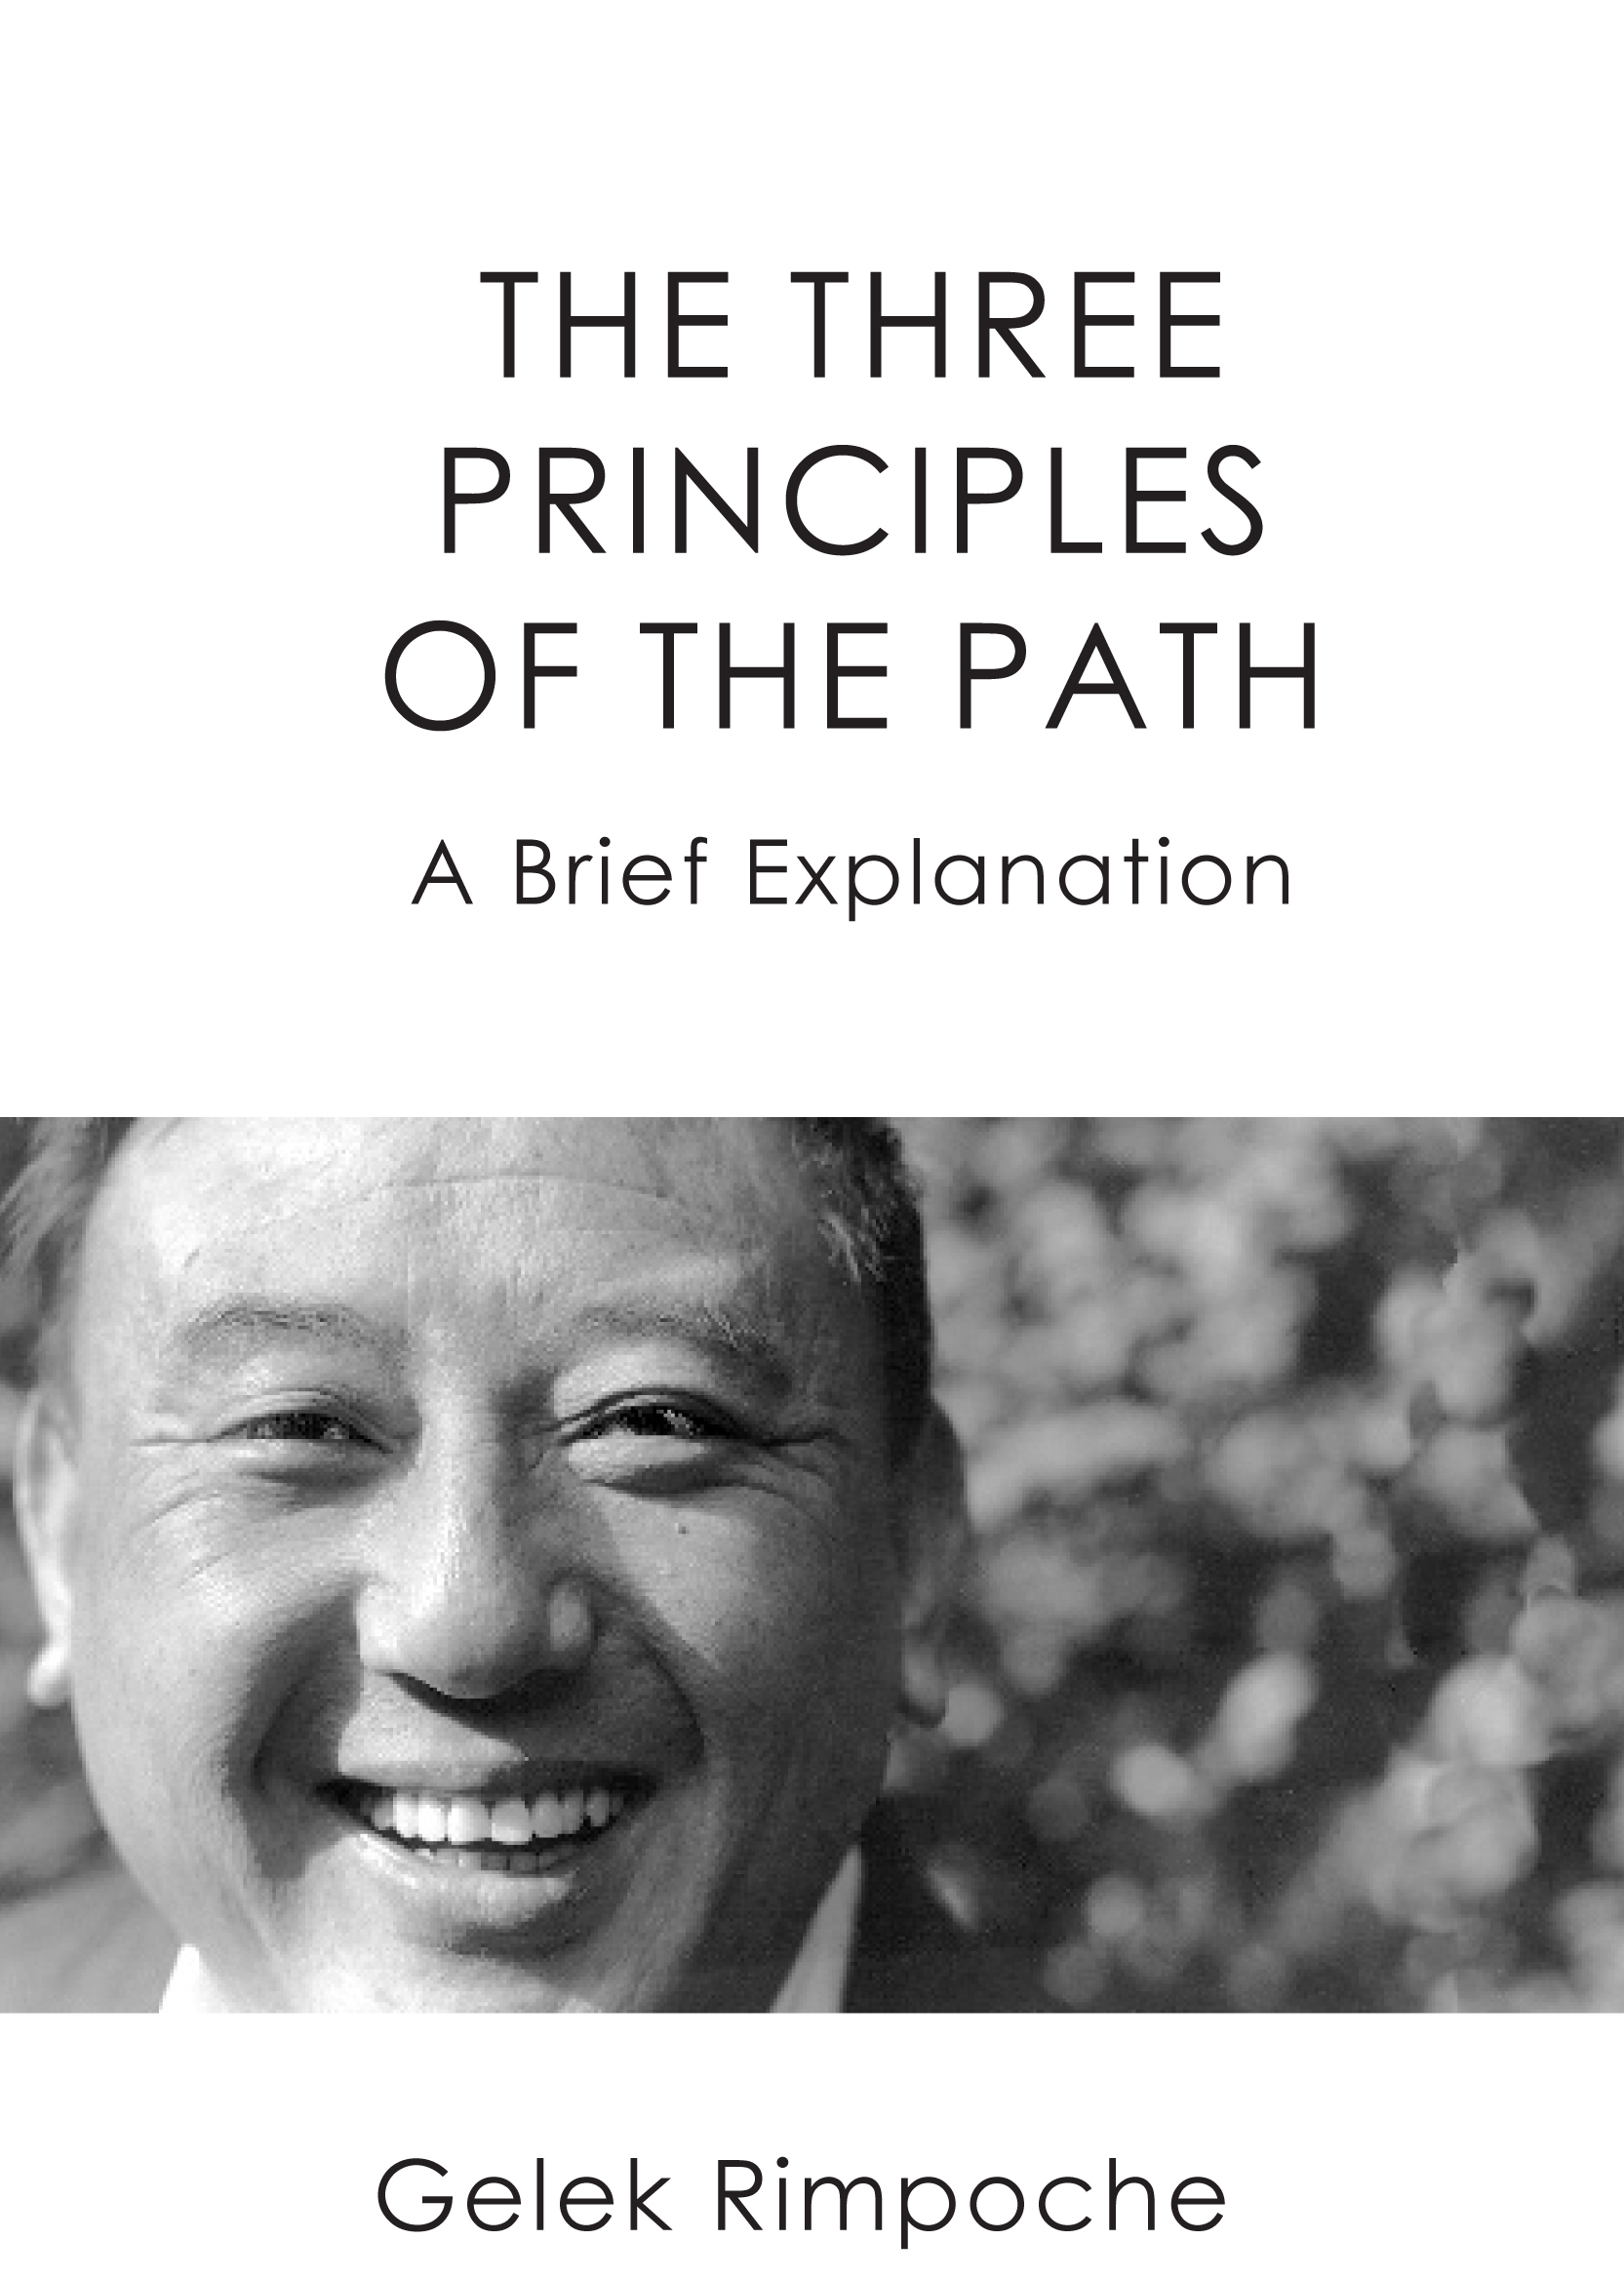 The Three Principles of the Path